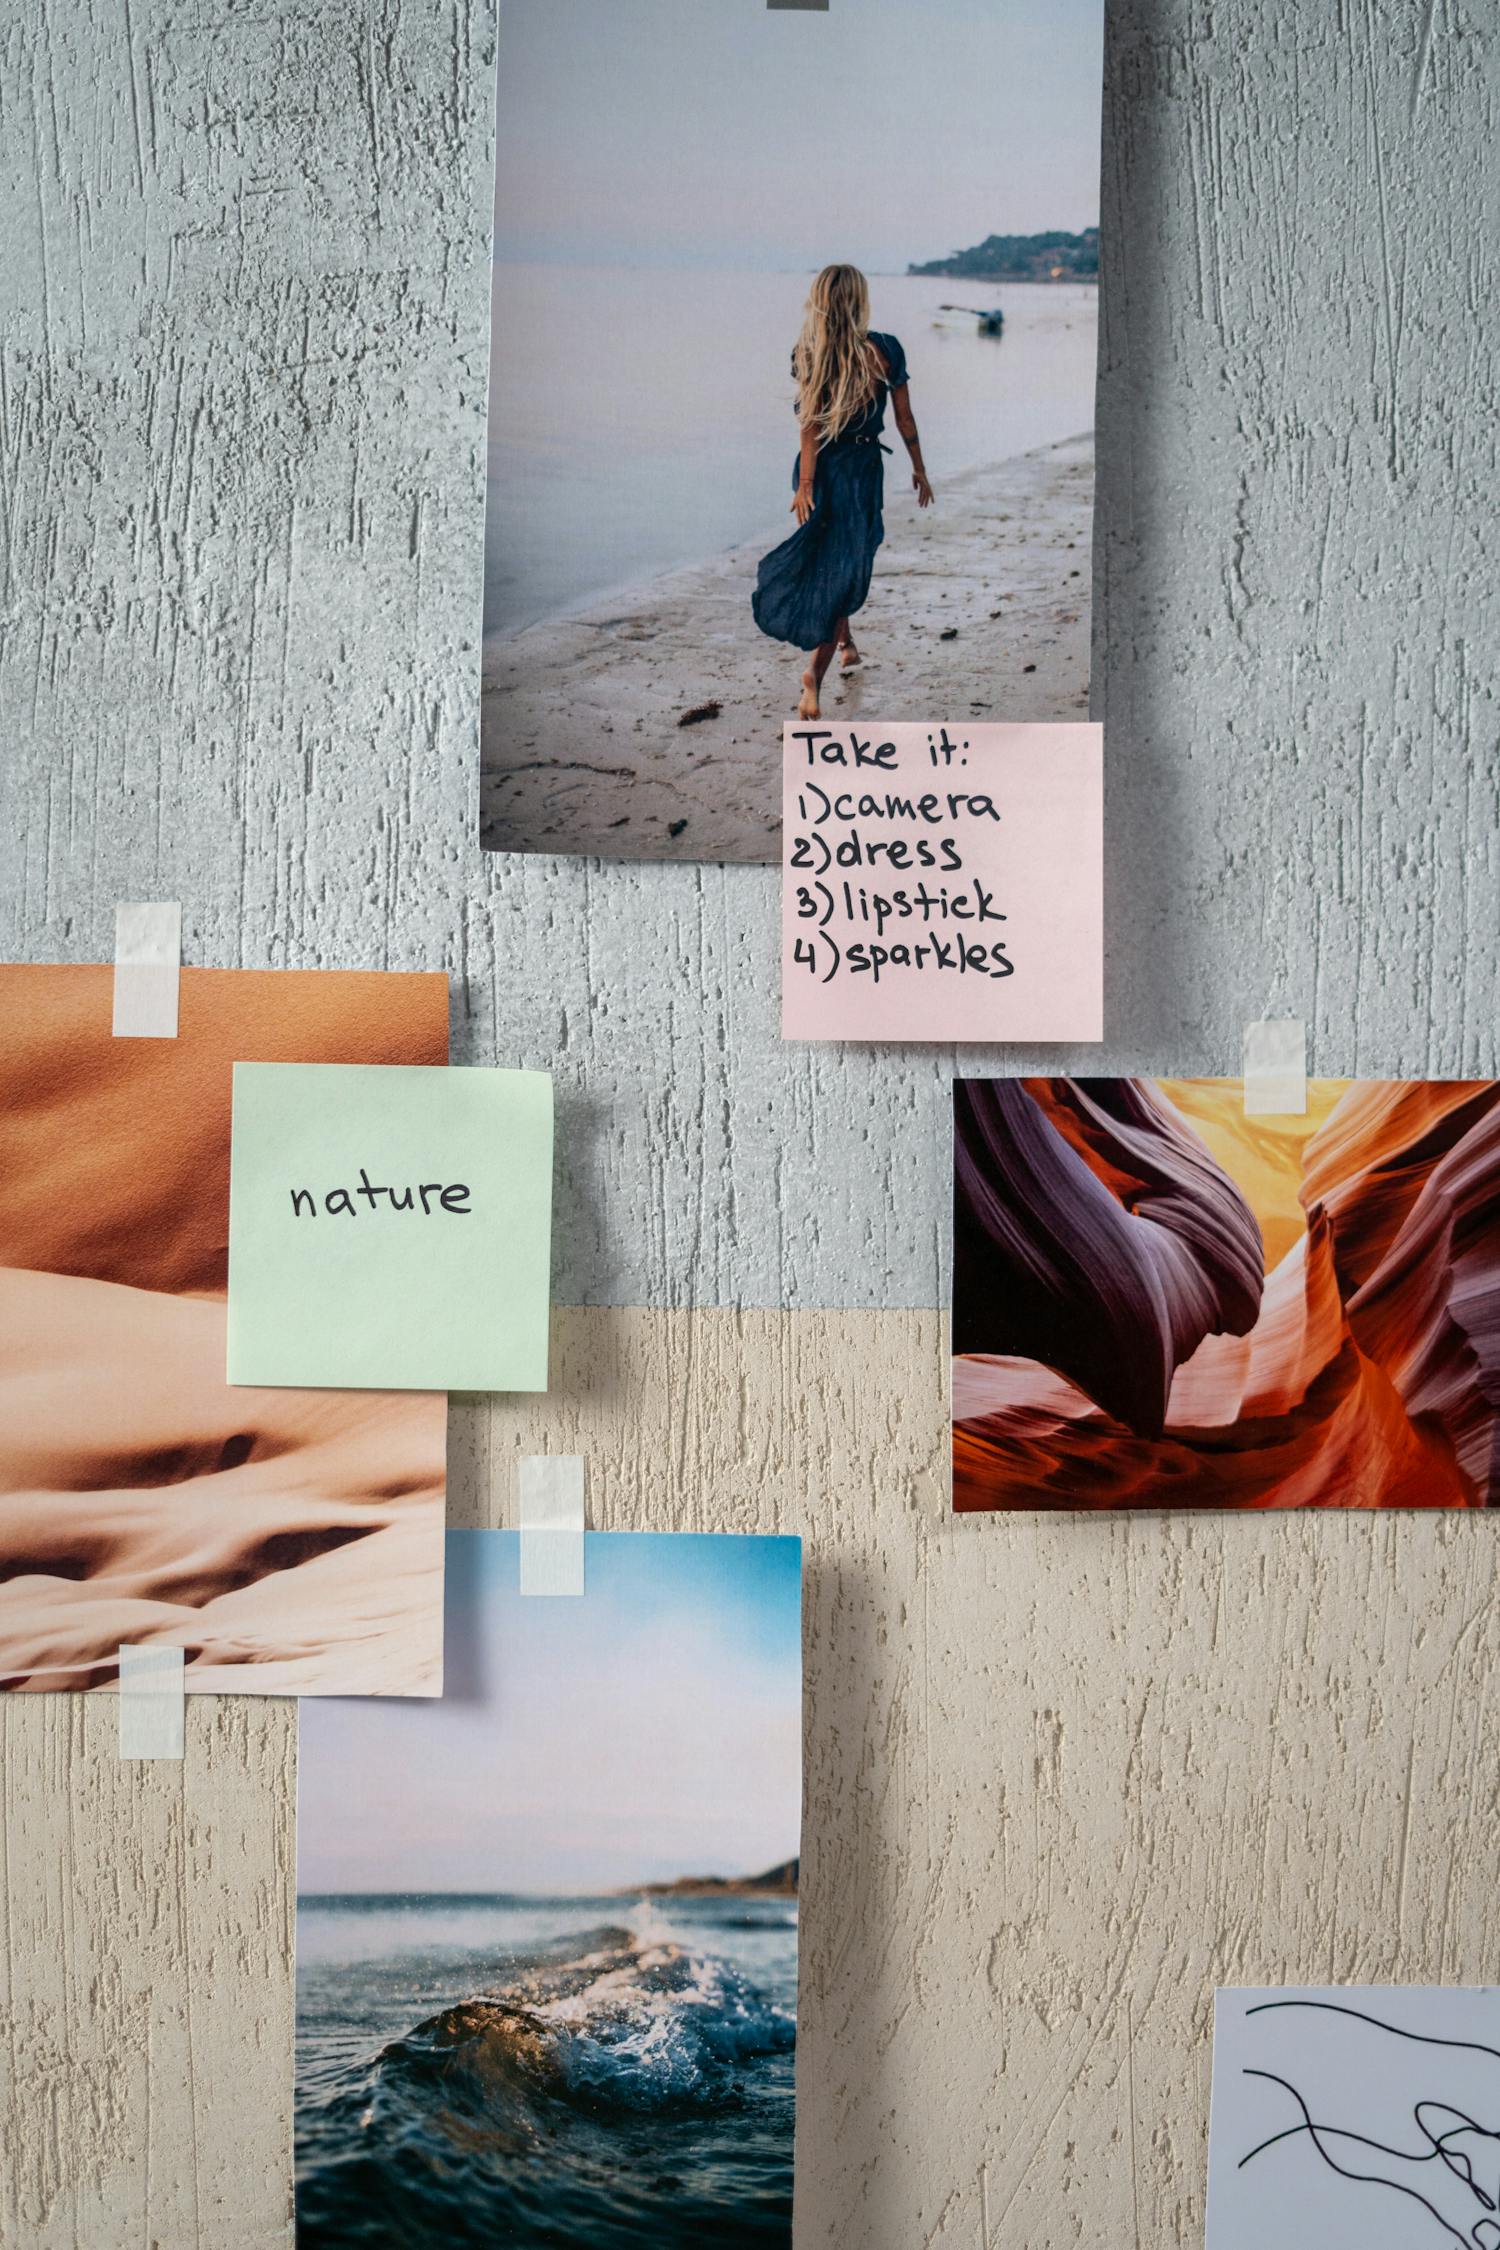 pictures-on-the-wall-free-stock-photo